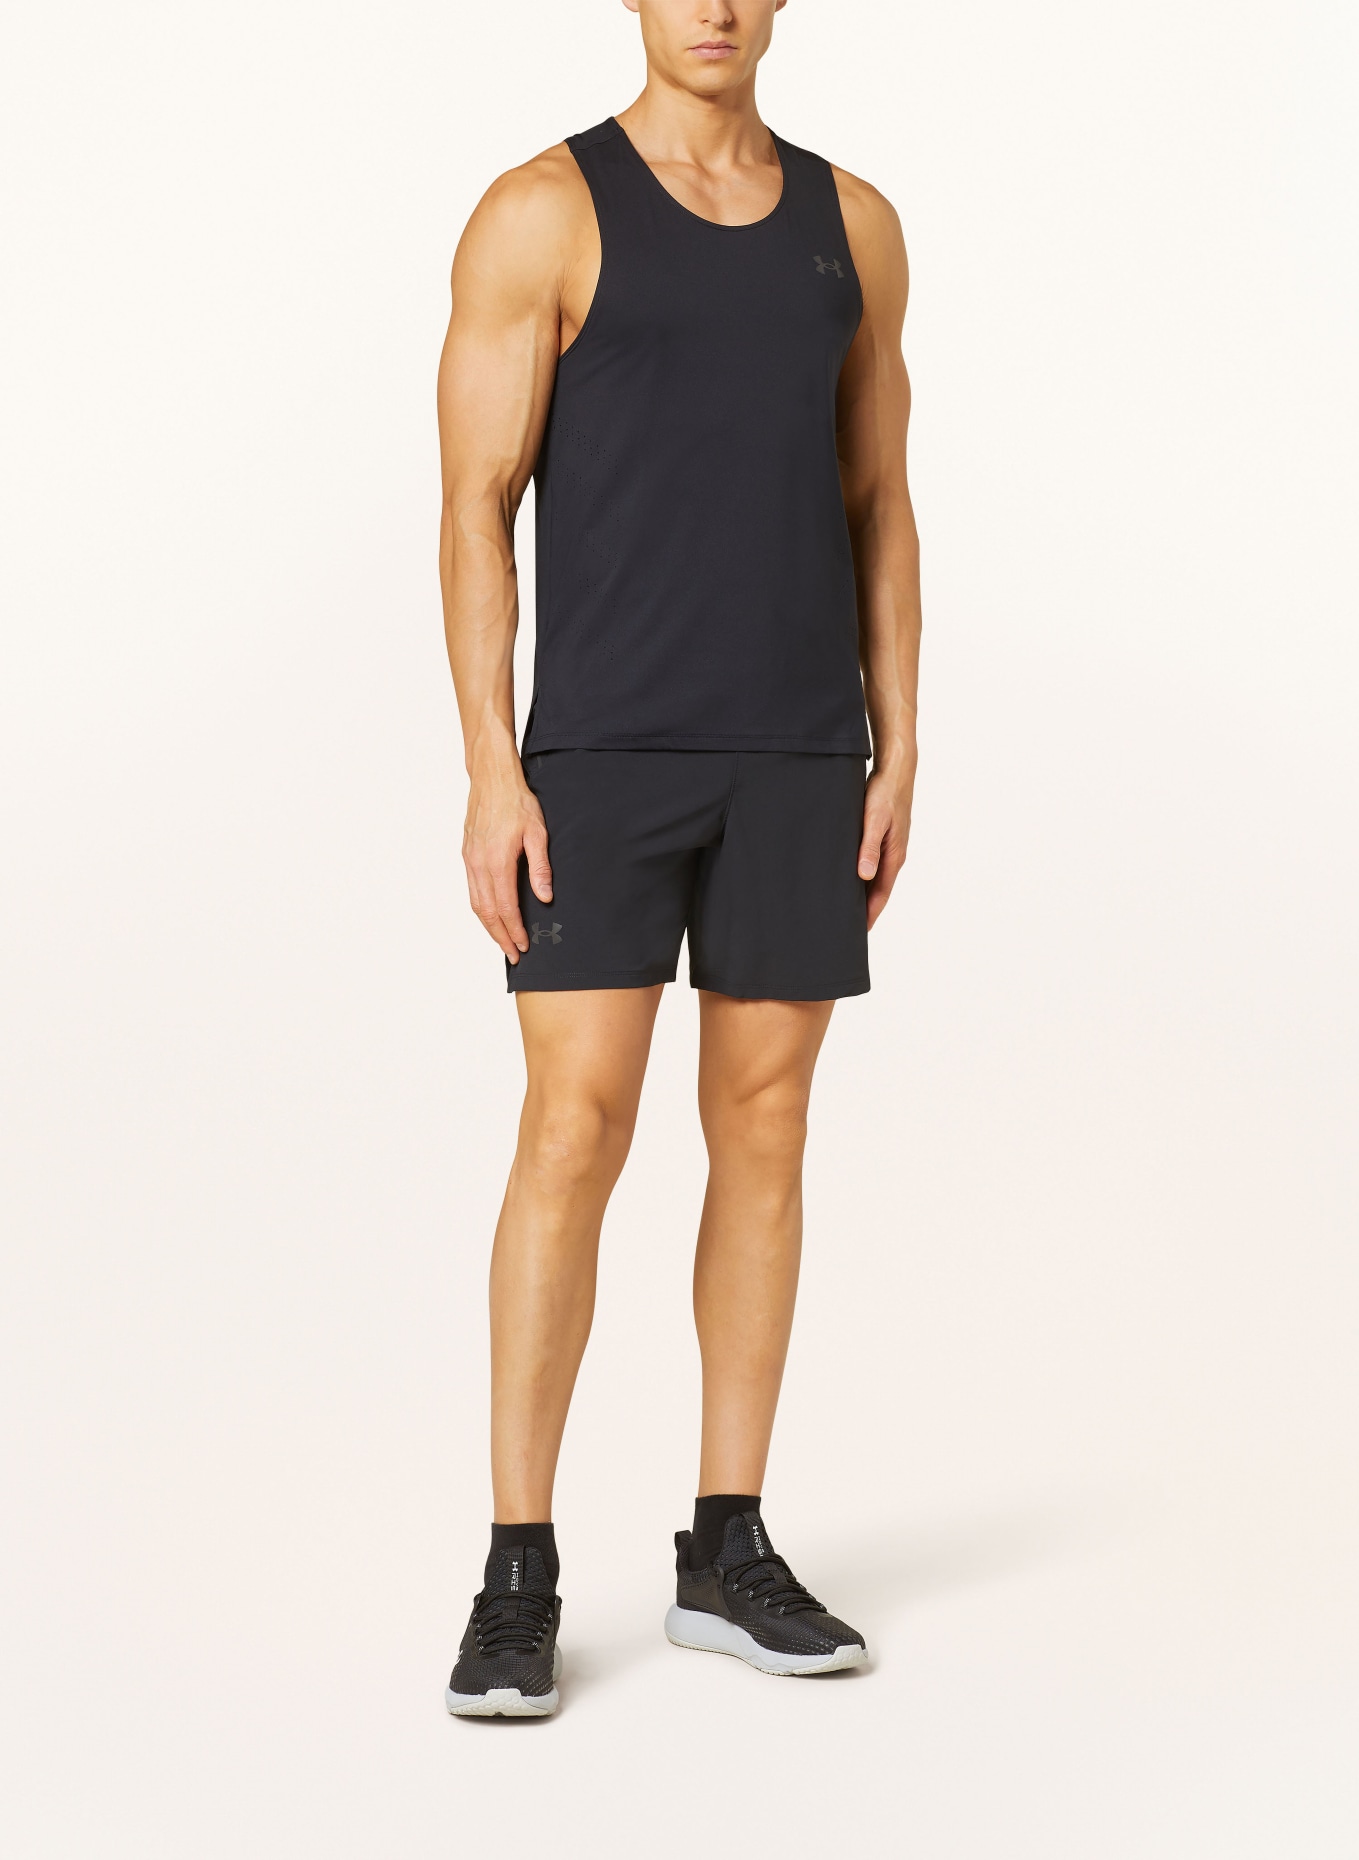 UNDER ARMOUR Running top LAUNCH ELITE, Color: BLACK (Image 2)